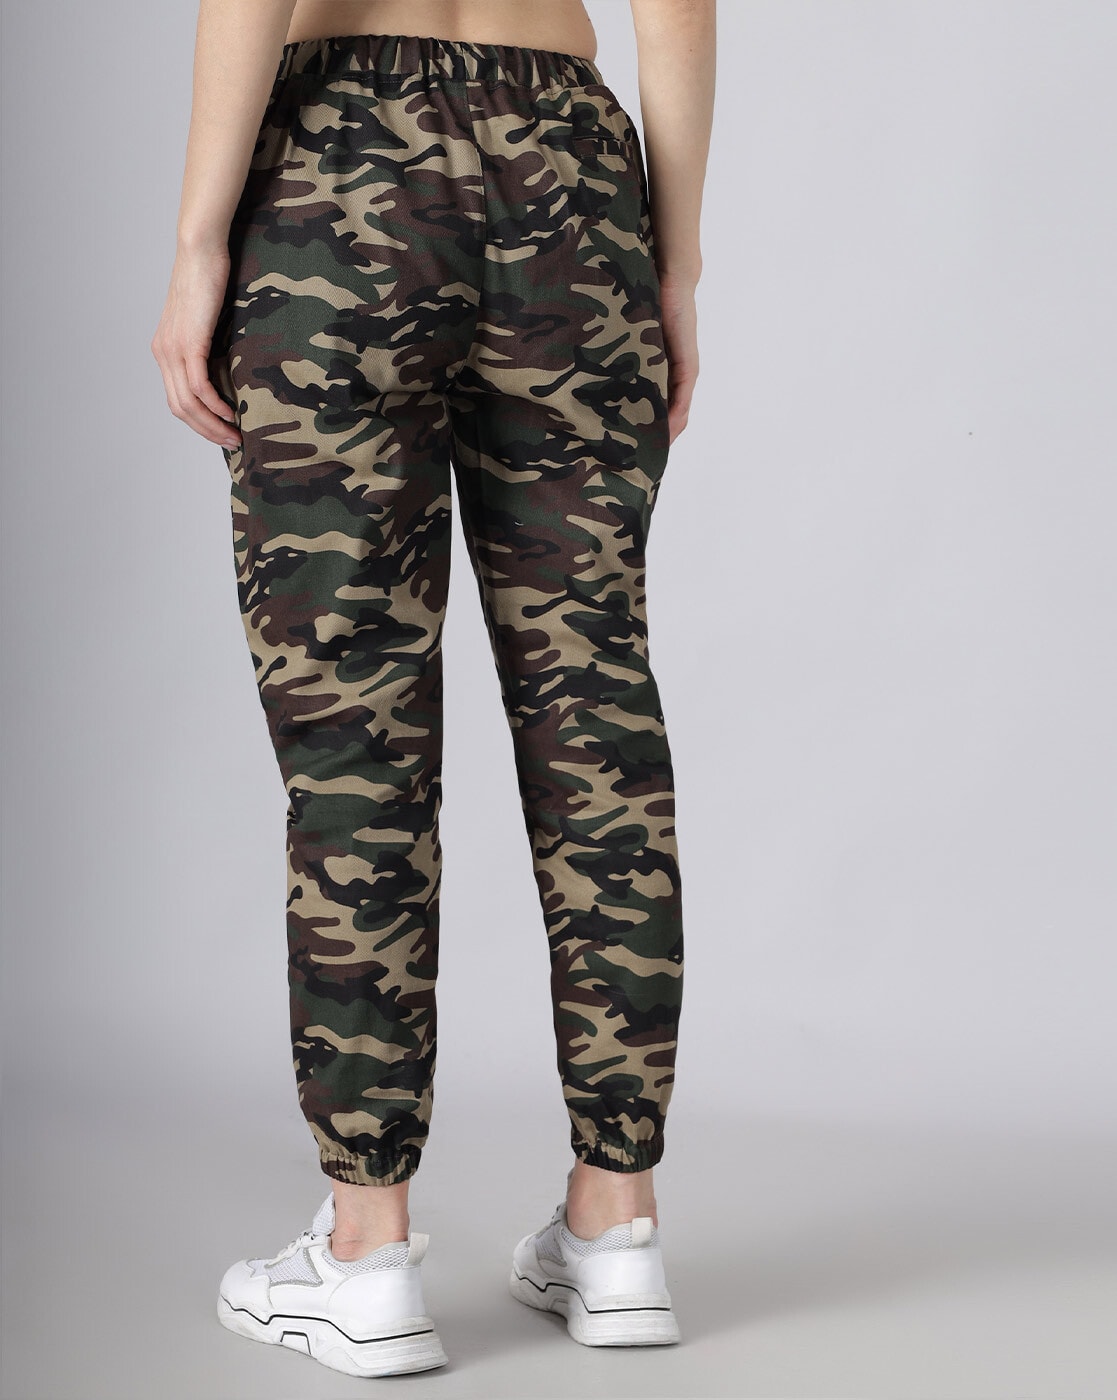 Camo Pants Outfits for Women-20 Ways to Wear Camouflage Pants | Camoflage  outfits, Camo pants outfit, Pant outfits for women